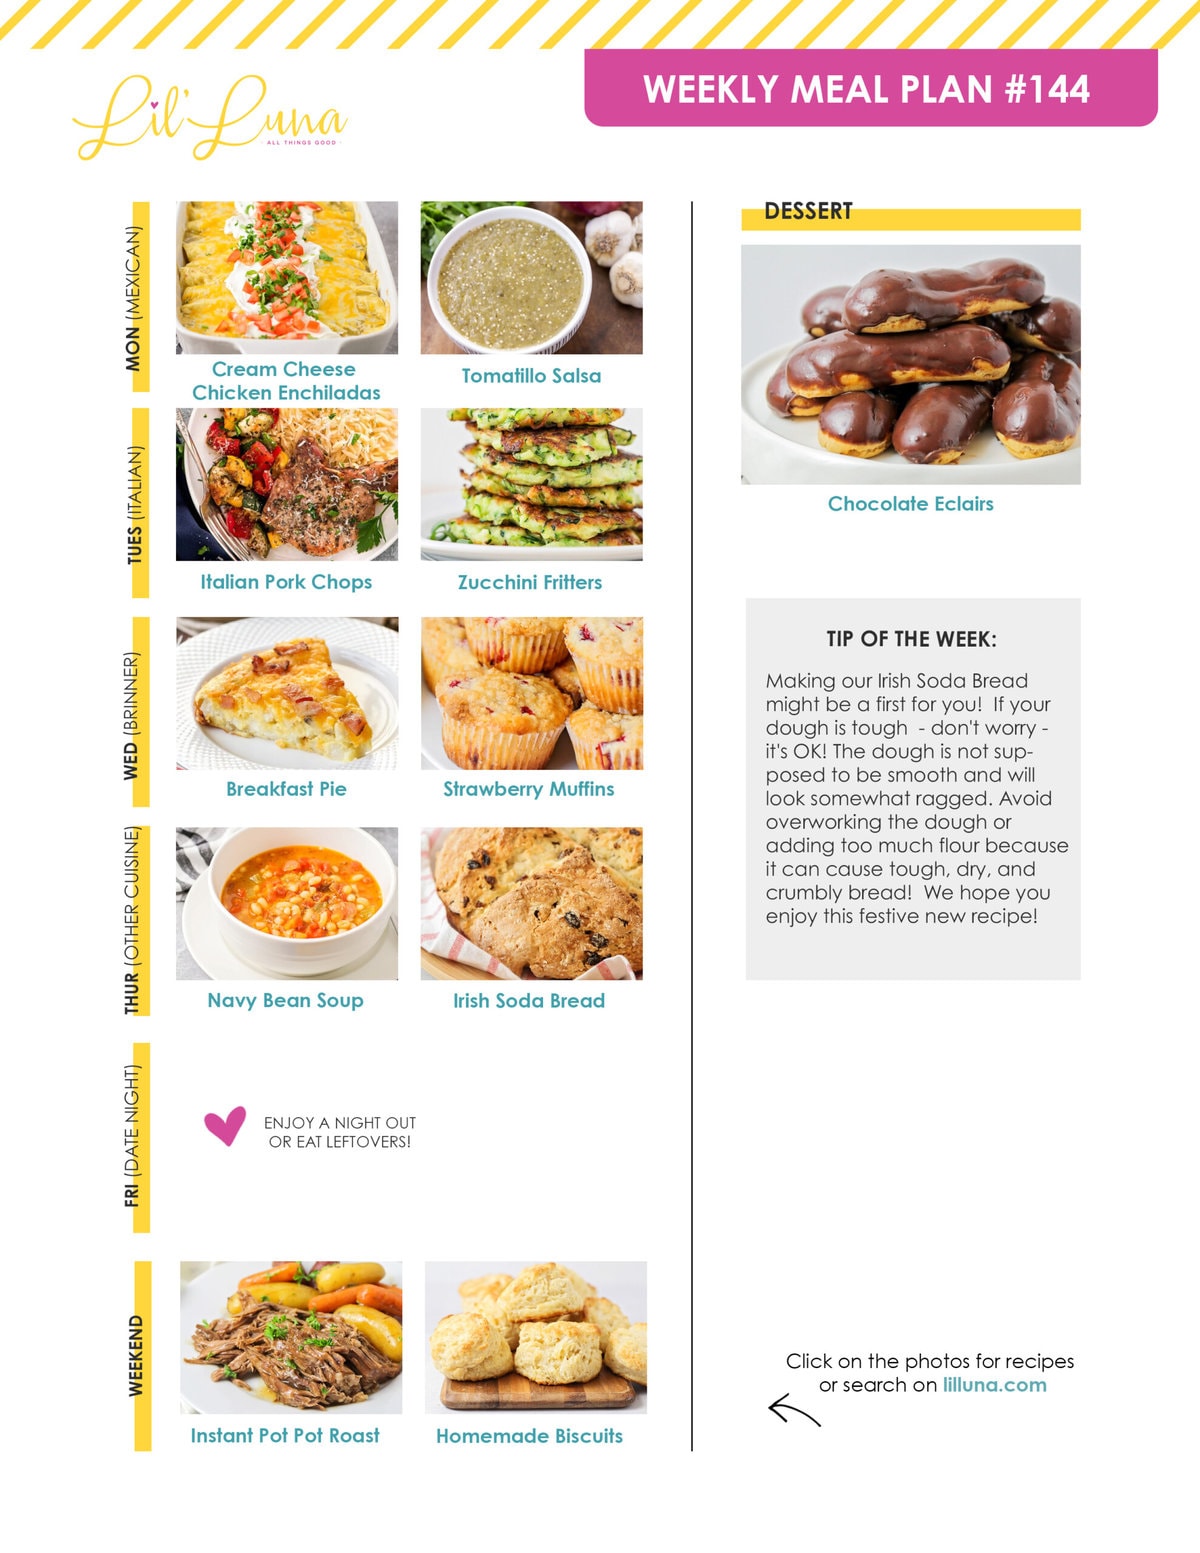 Meal plan 144 graphic.